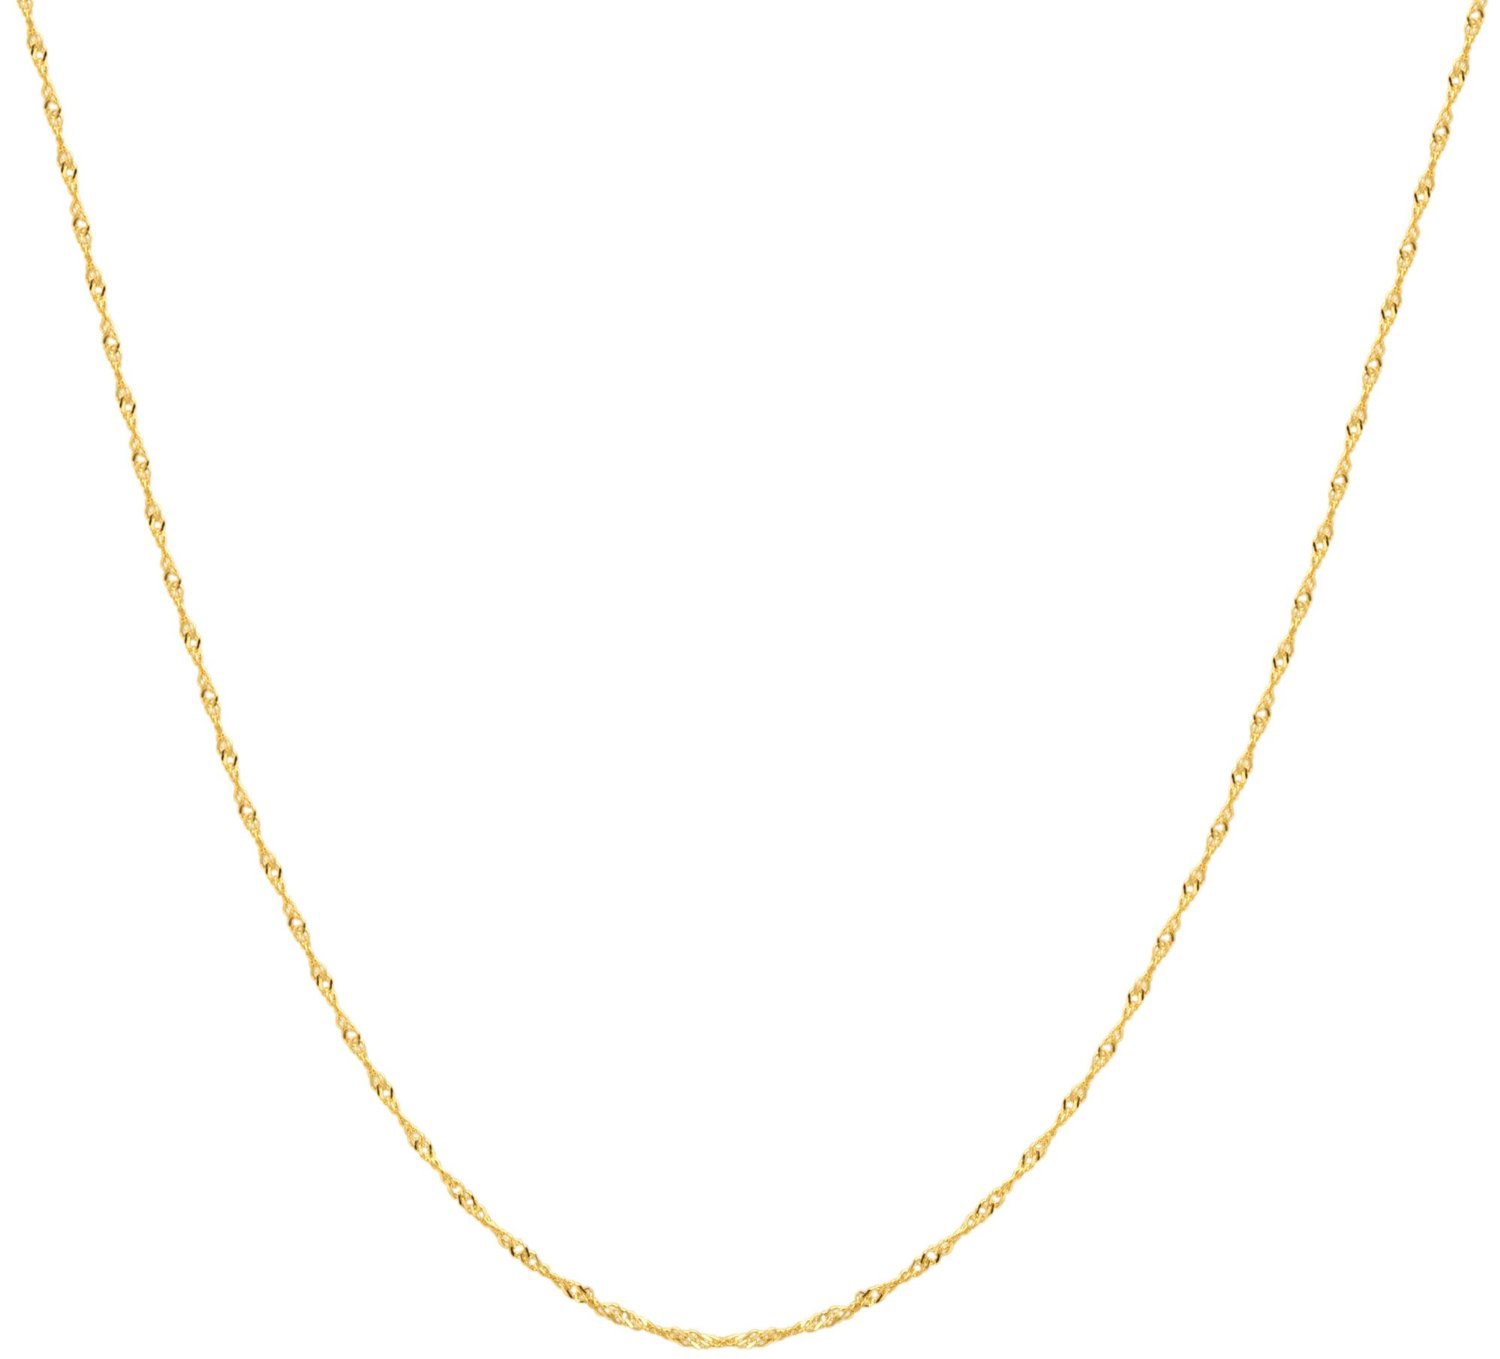 Singapore Gold Chain | Singapore 14K Gold Chain | My 12 Step Store